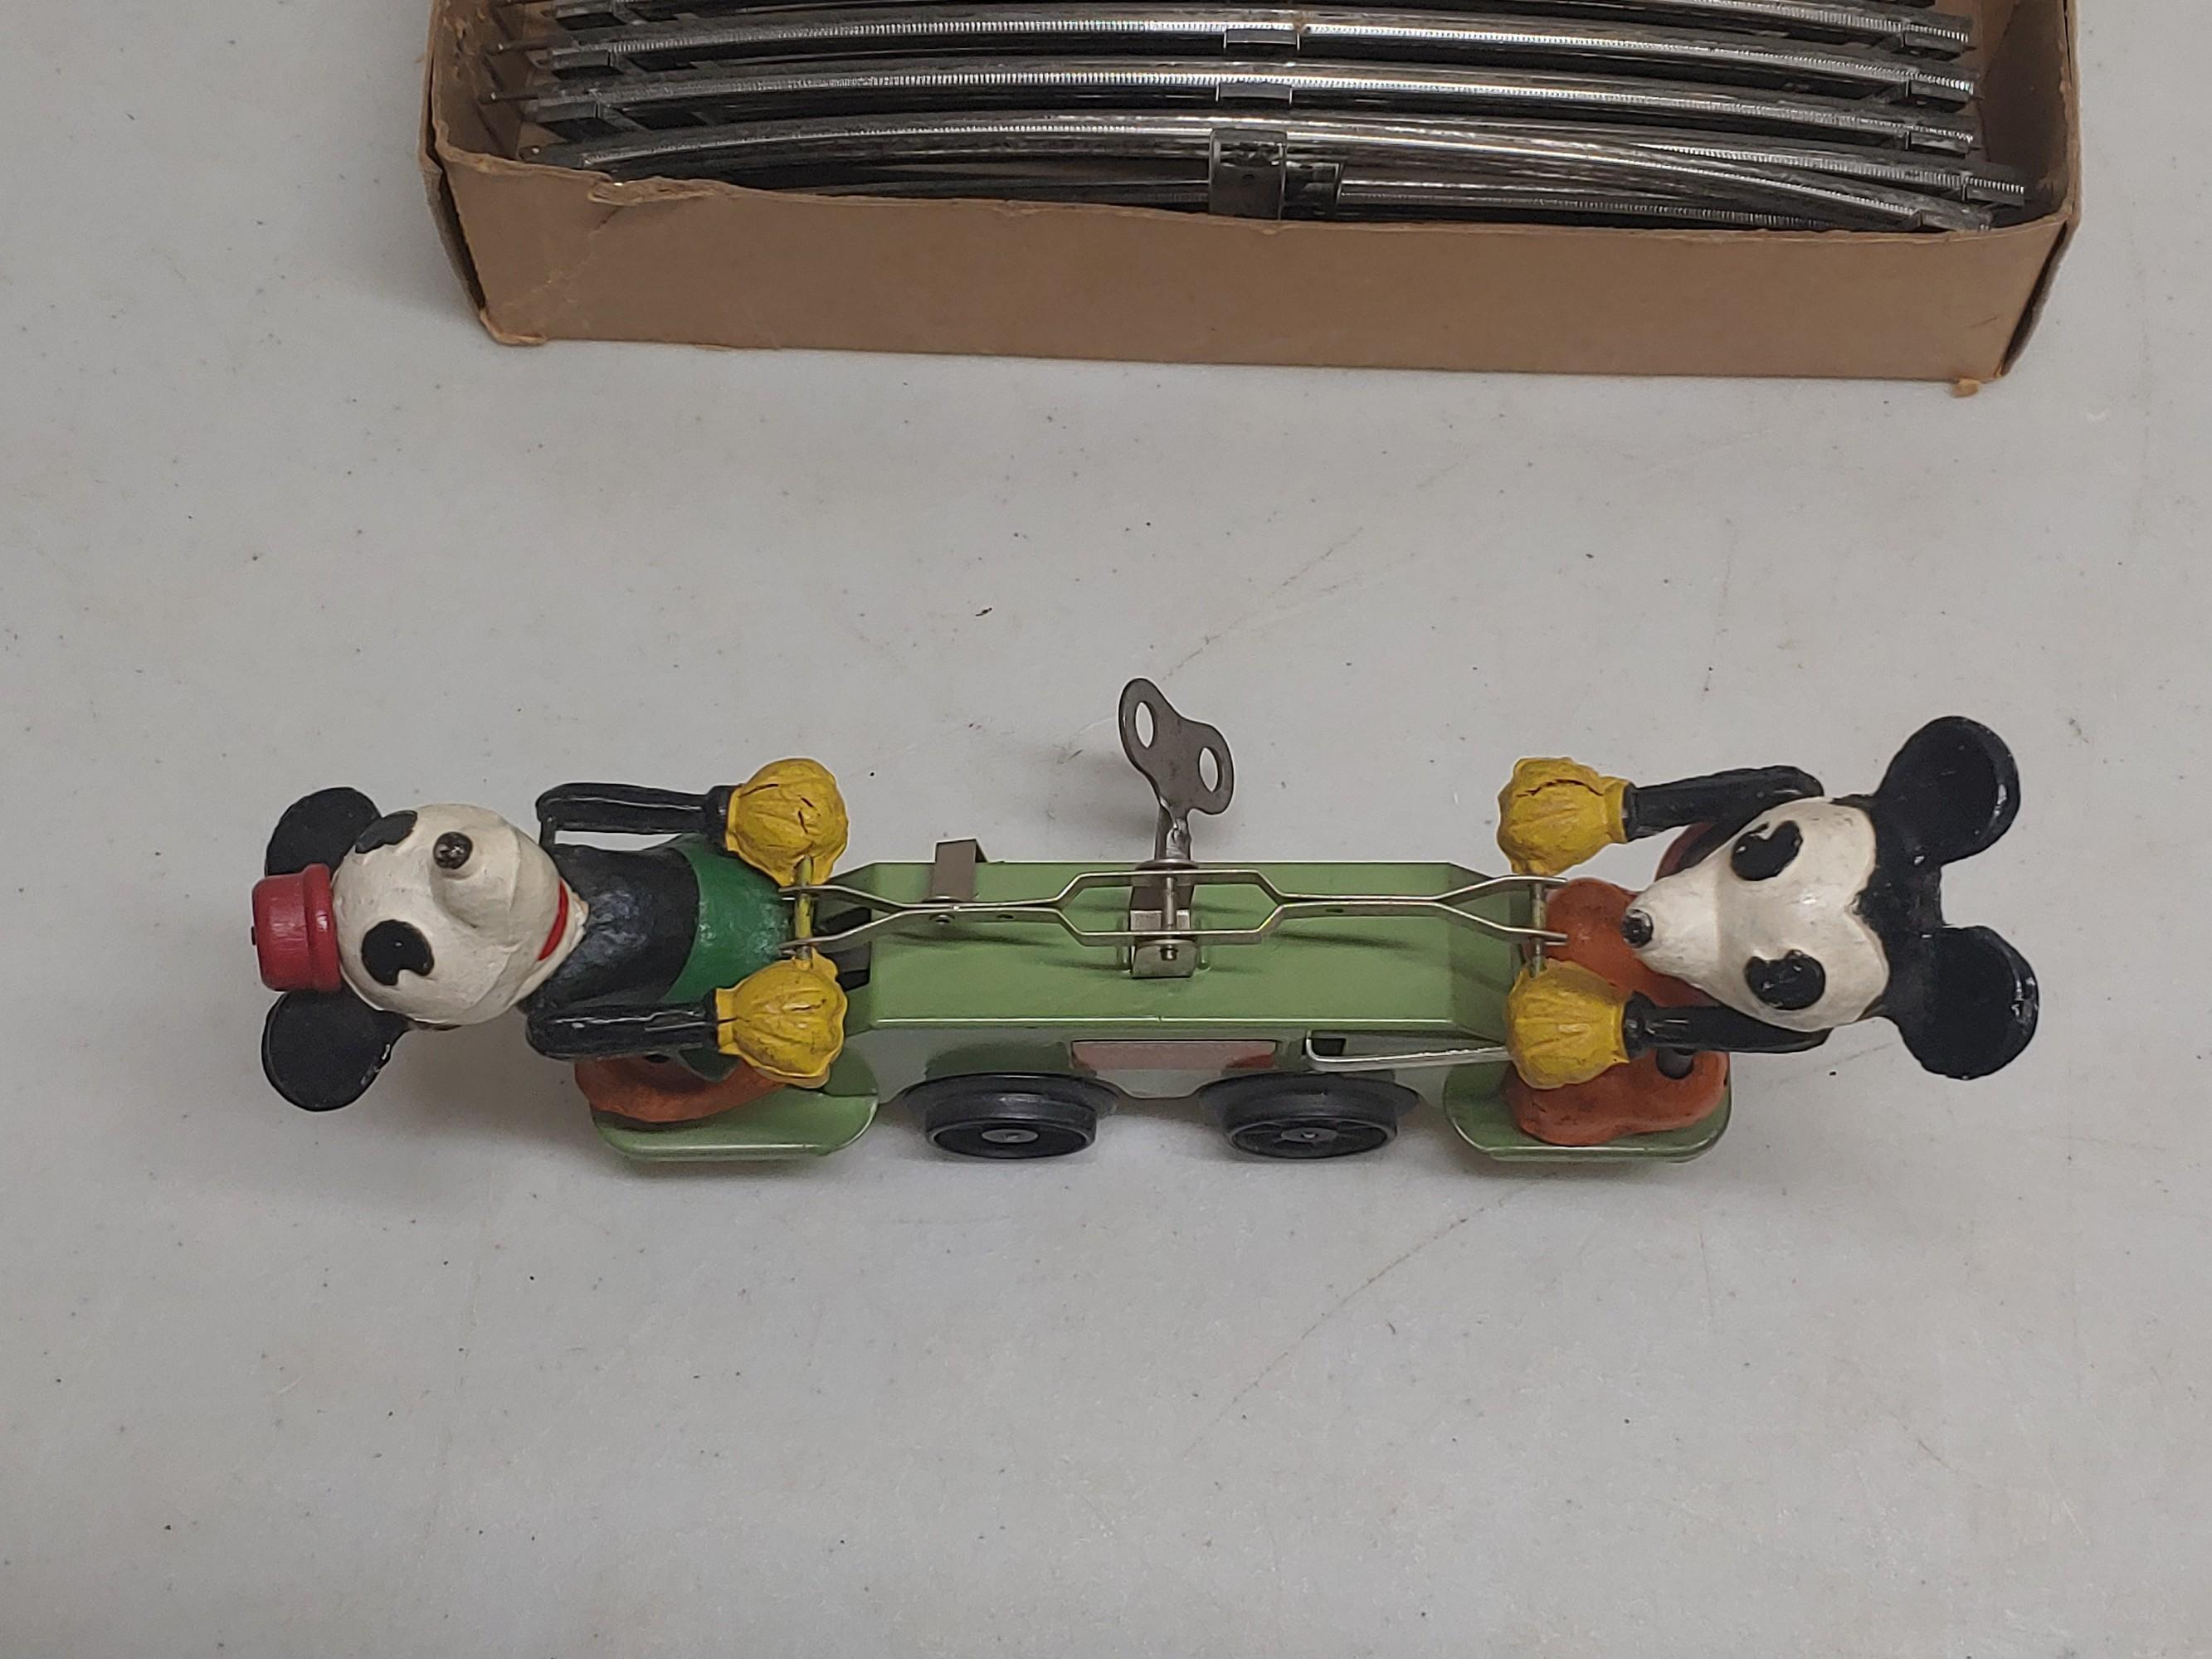 Lionel Mickey Mouse Hand Car Wind-Up Toy Set